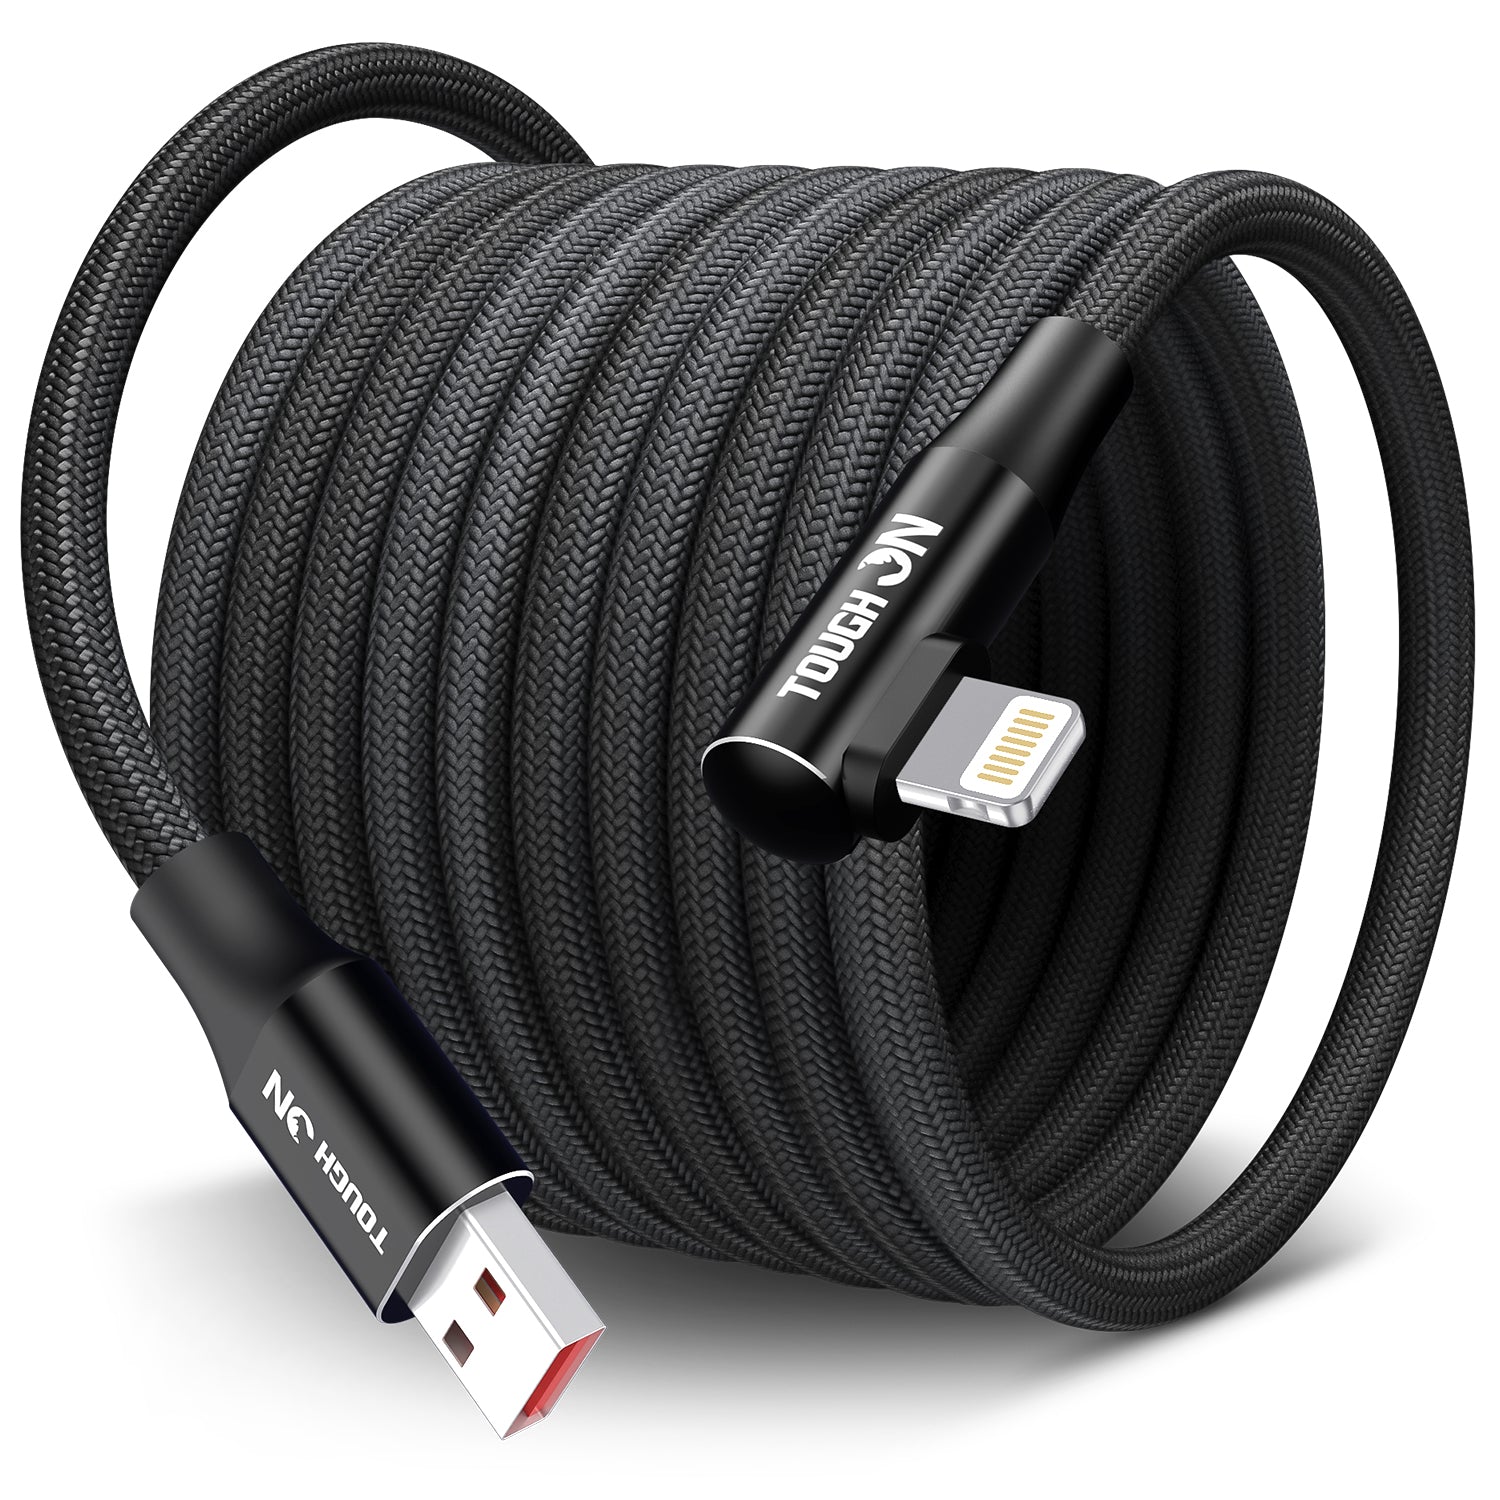 Tough On USB A to Lightning Cable 2.4A Fast Charging Cable 2M